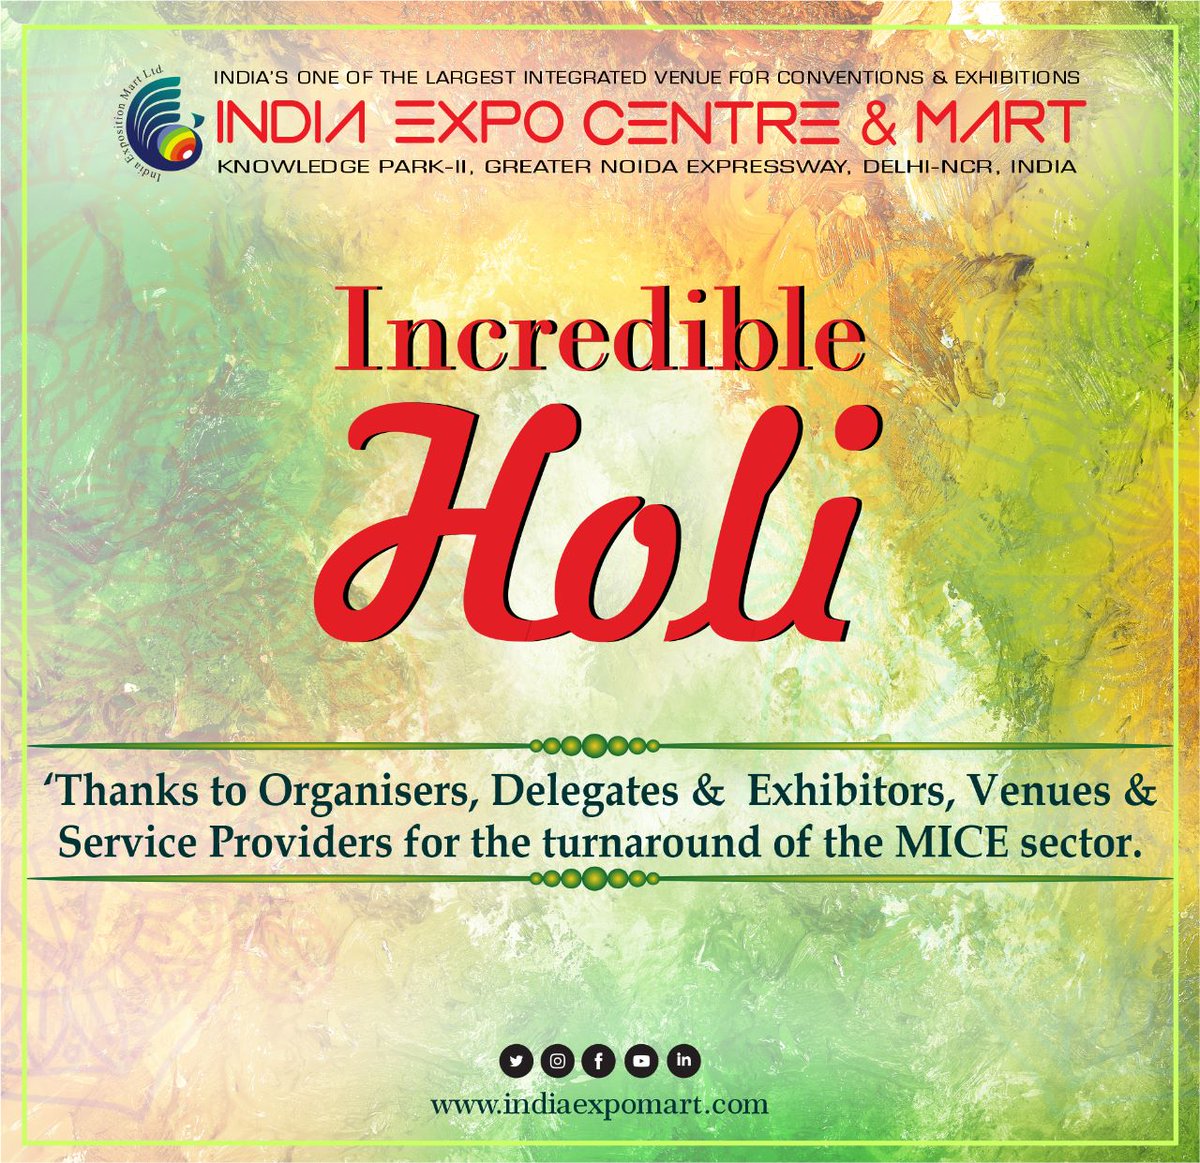 Let the colors of Holi brighten up your life with joy and positivity. Have a great time celebrating with your loved ones. Happy Holi!
.
.
.
#ieml #indiaexpositionmartlimited #IndiaExpoMart #indiaexpocentre #HappyHoli #FestivalOfColors #HoliCelebrations #HoliFestivities